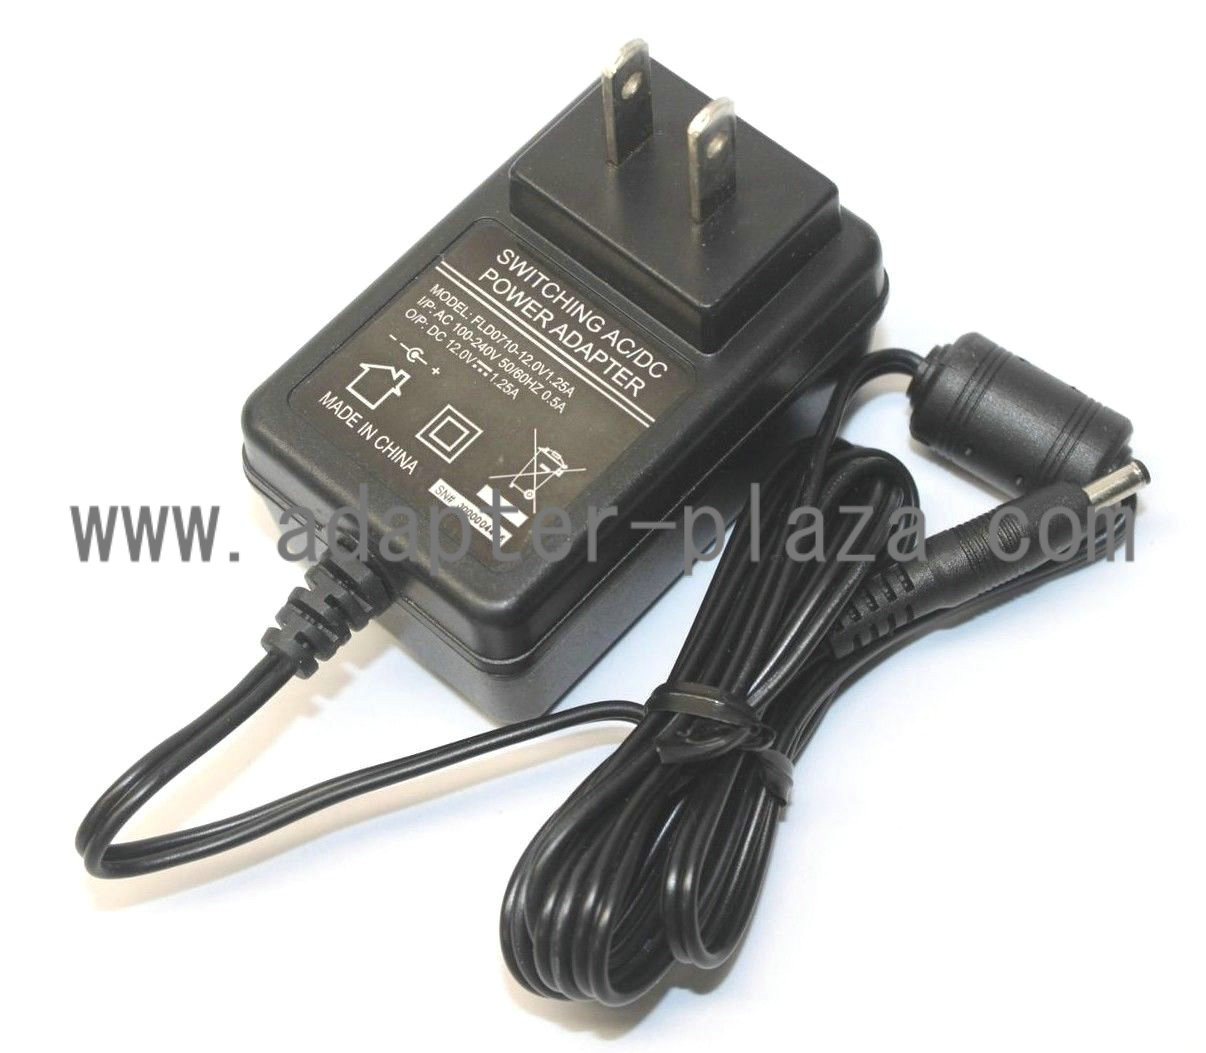 NEW 12V 1.25A AC Adapter FLD0710-12.0V1.25A Switching Power Supply